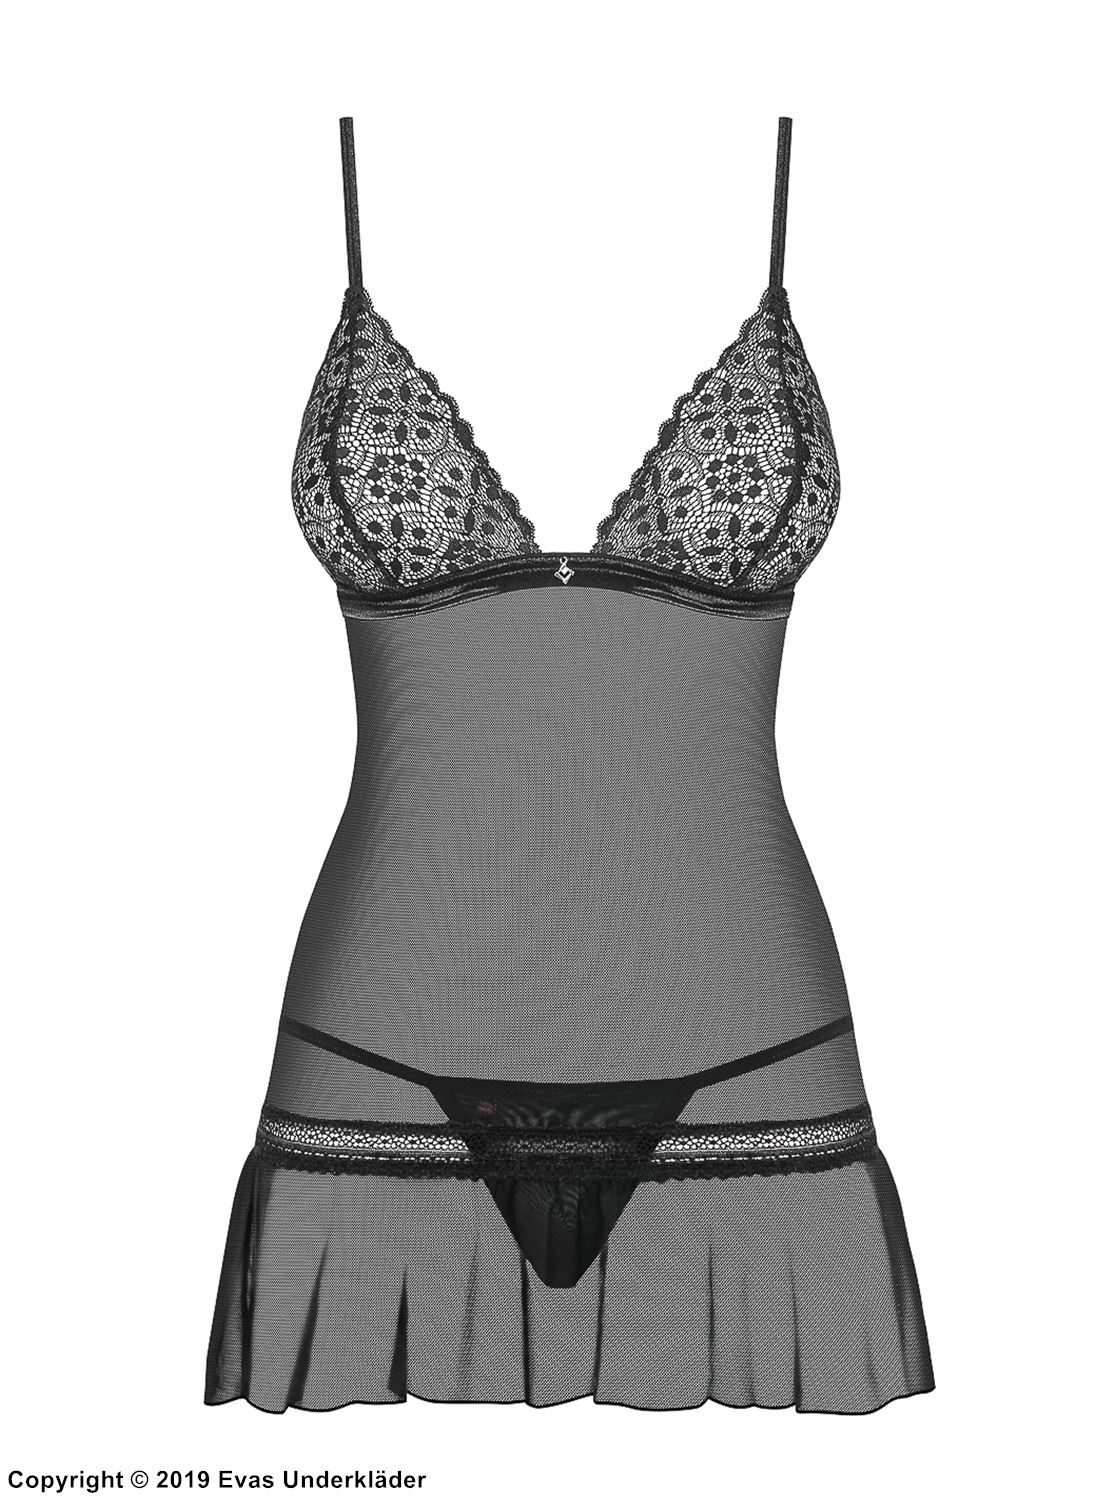 Skin-tight chemise, see-through mesh, ruffles, lace cups